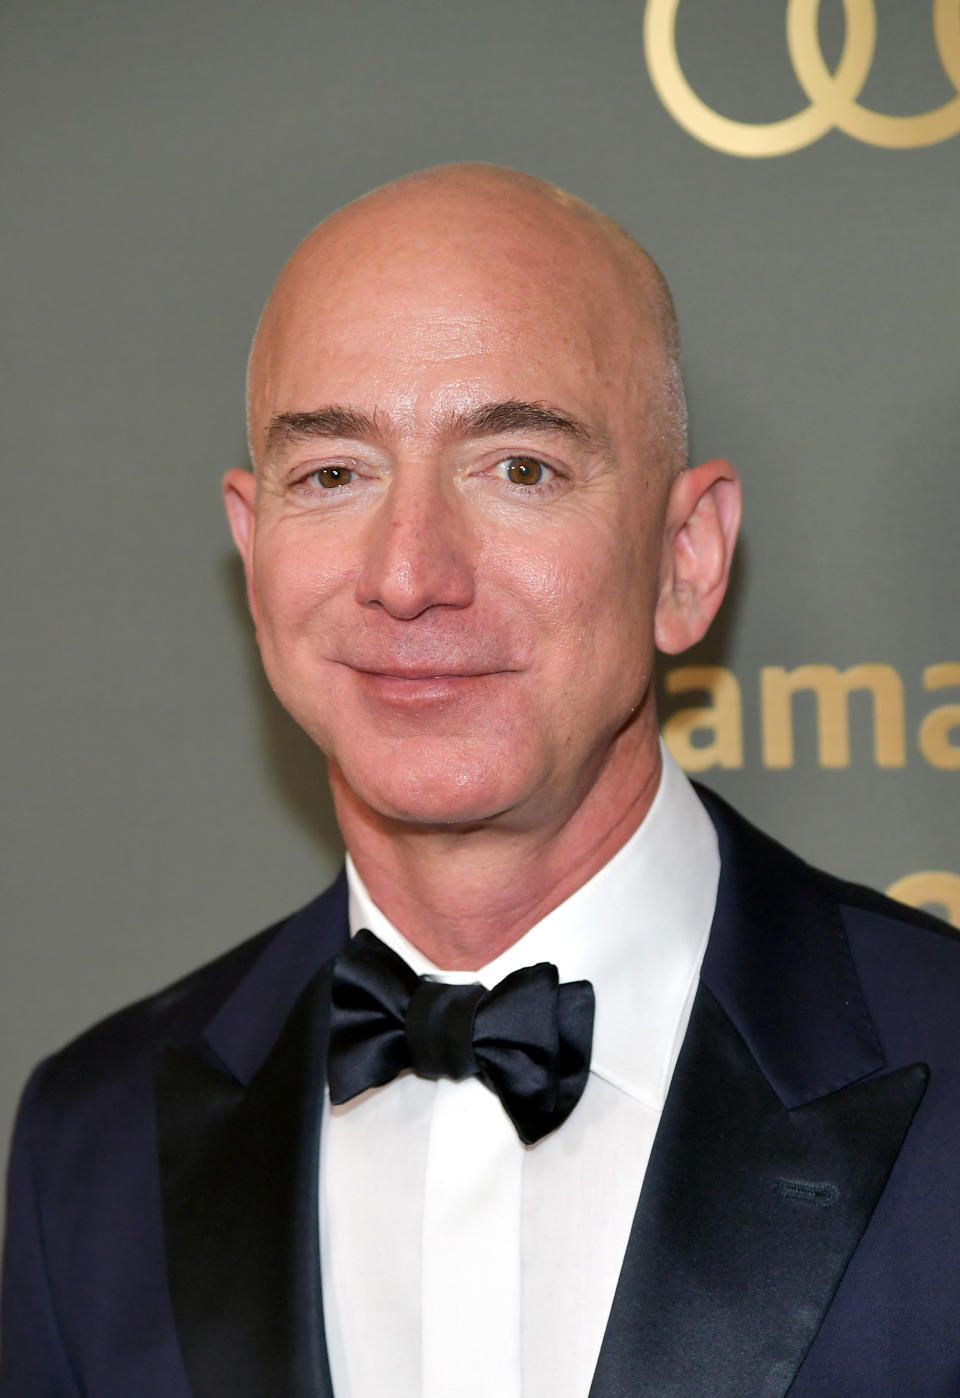 In late 1993, Bezos decided to establish an online bookstore. He left his job at D. E. Shaw and founded Amazon in his garage on July 5, 1994, after writing its business plan on a cross-country drive from New York City to Seattle. Bezos initially named his new company Cadabra but later changed the name to Amazon after the Amazon River in South America.